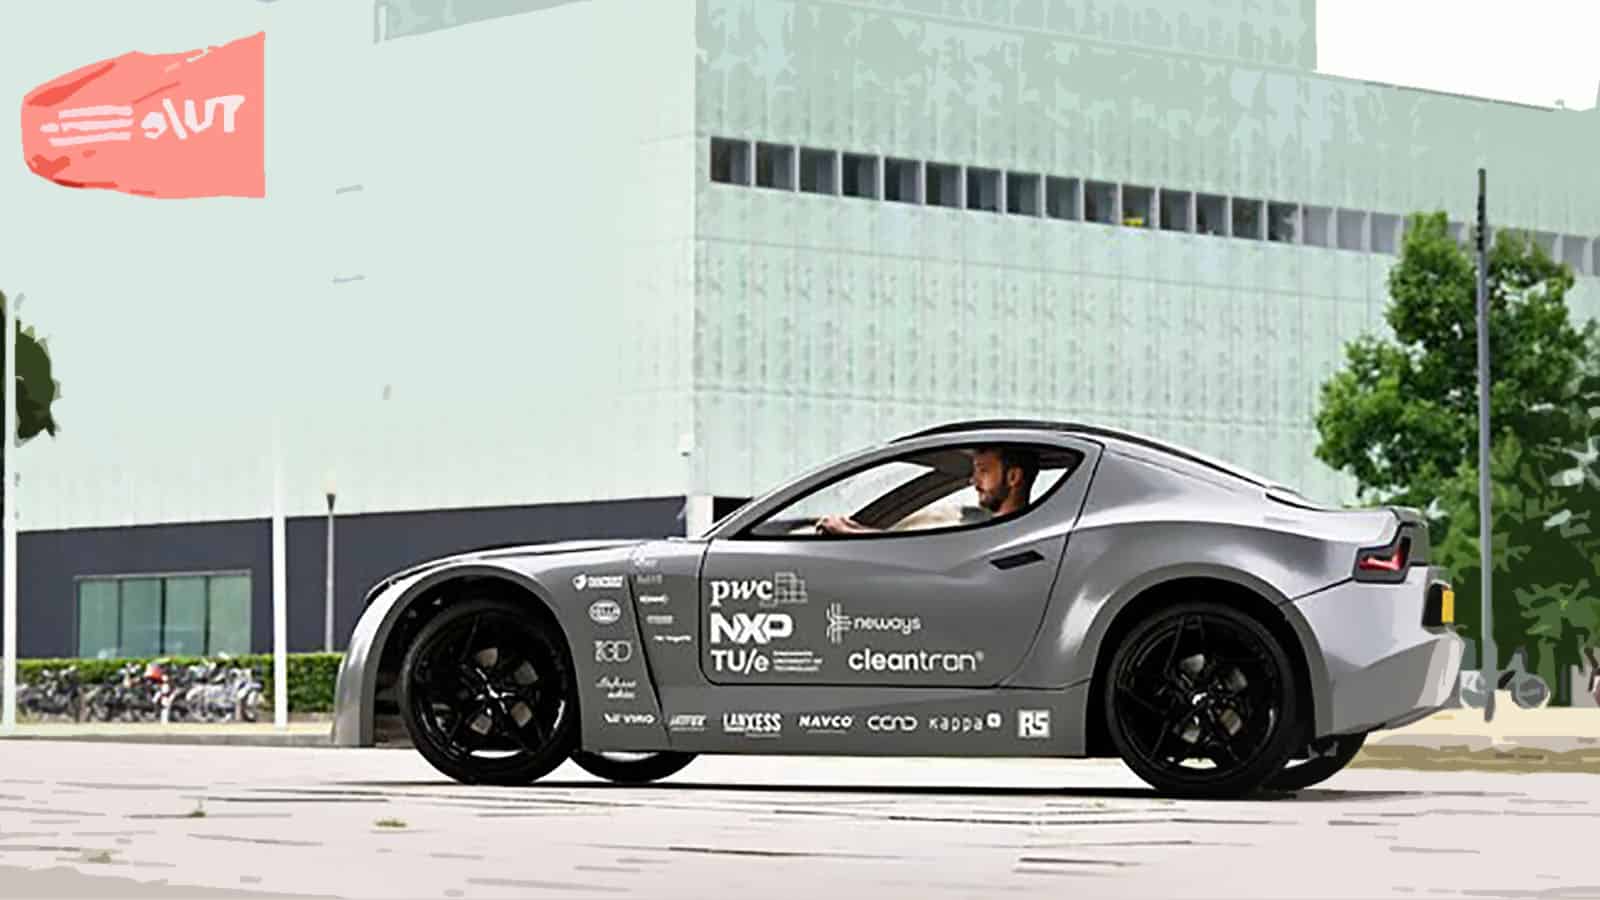 This electric car is not only zero emissions, but also cleans the air of CO₂ when circulating